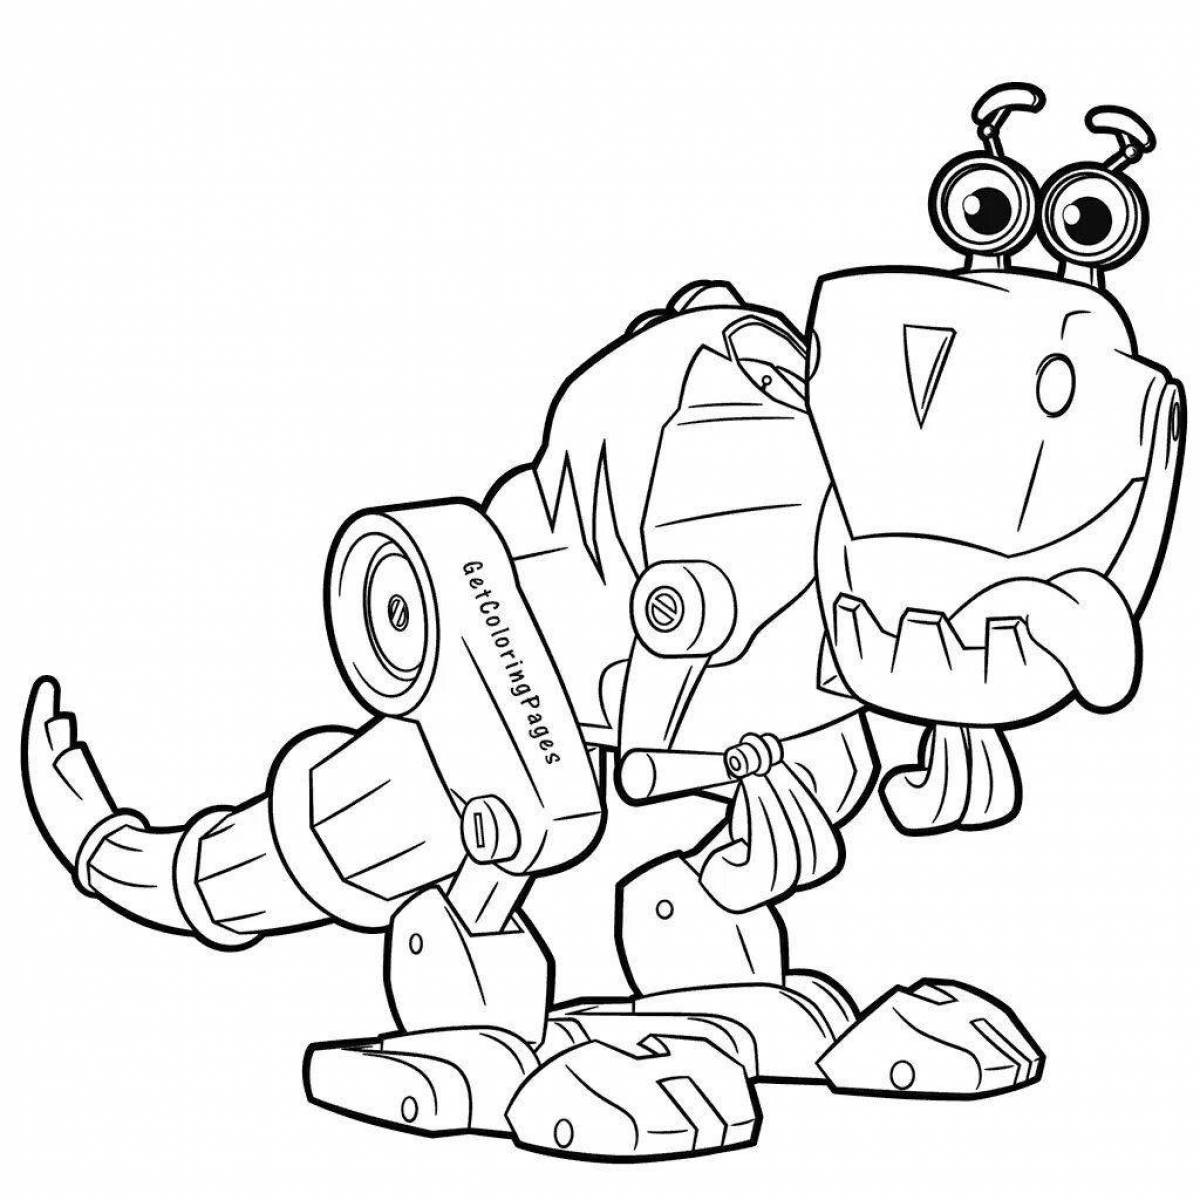 Fun coloring book for 5 year old robots